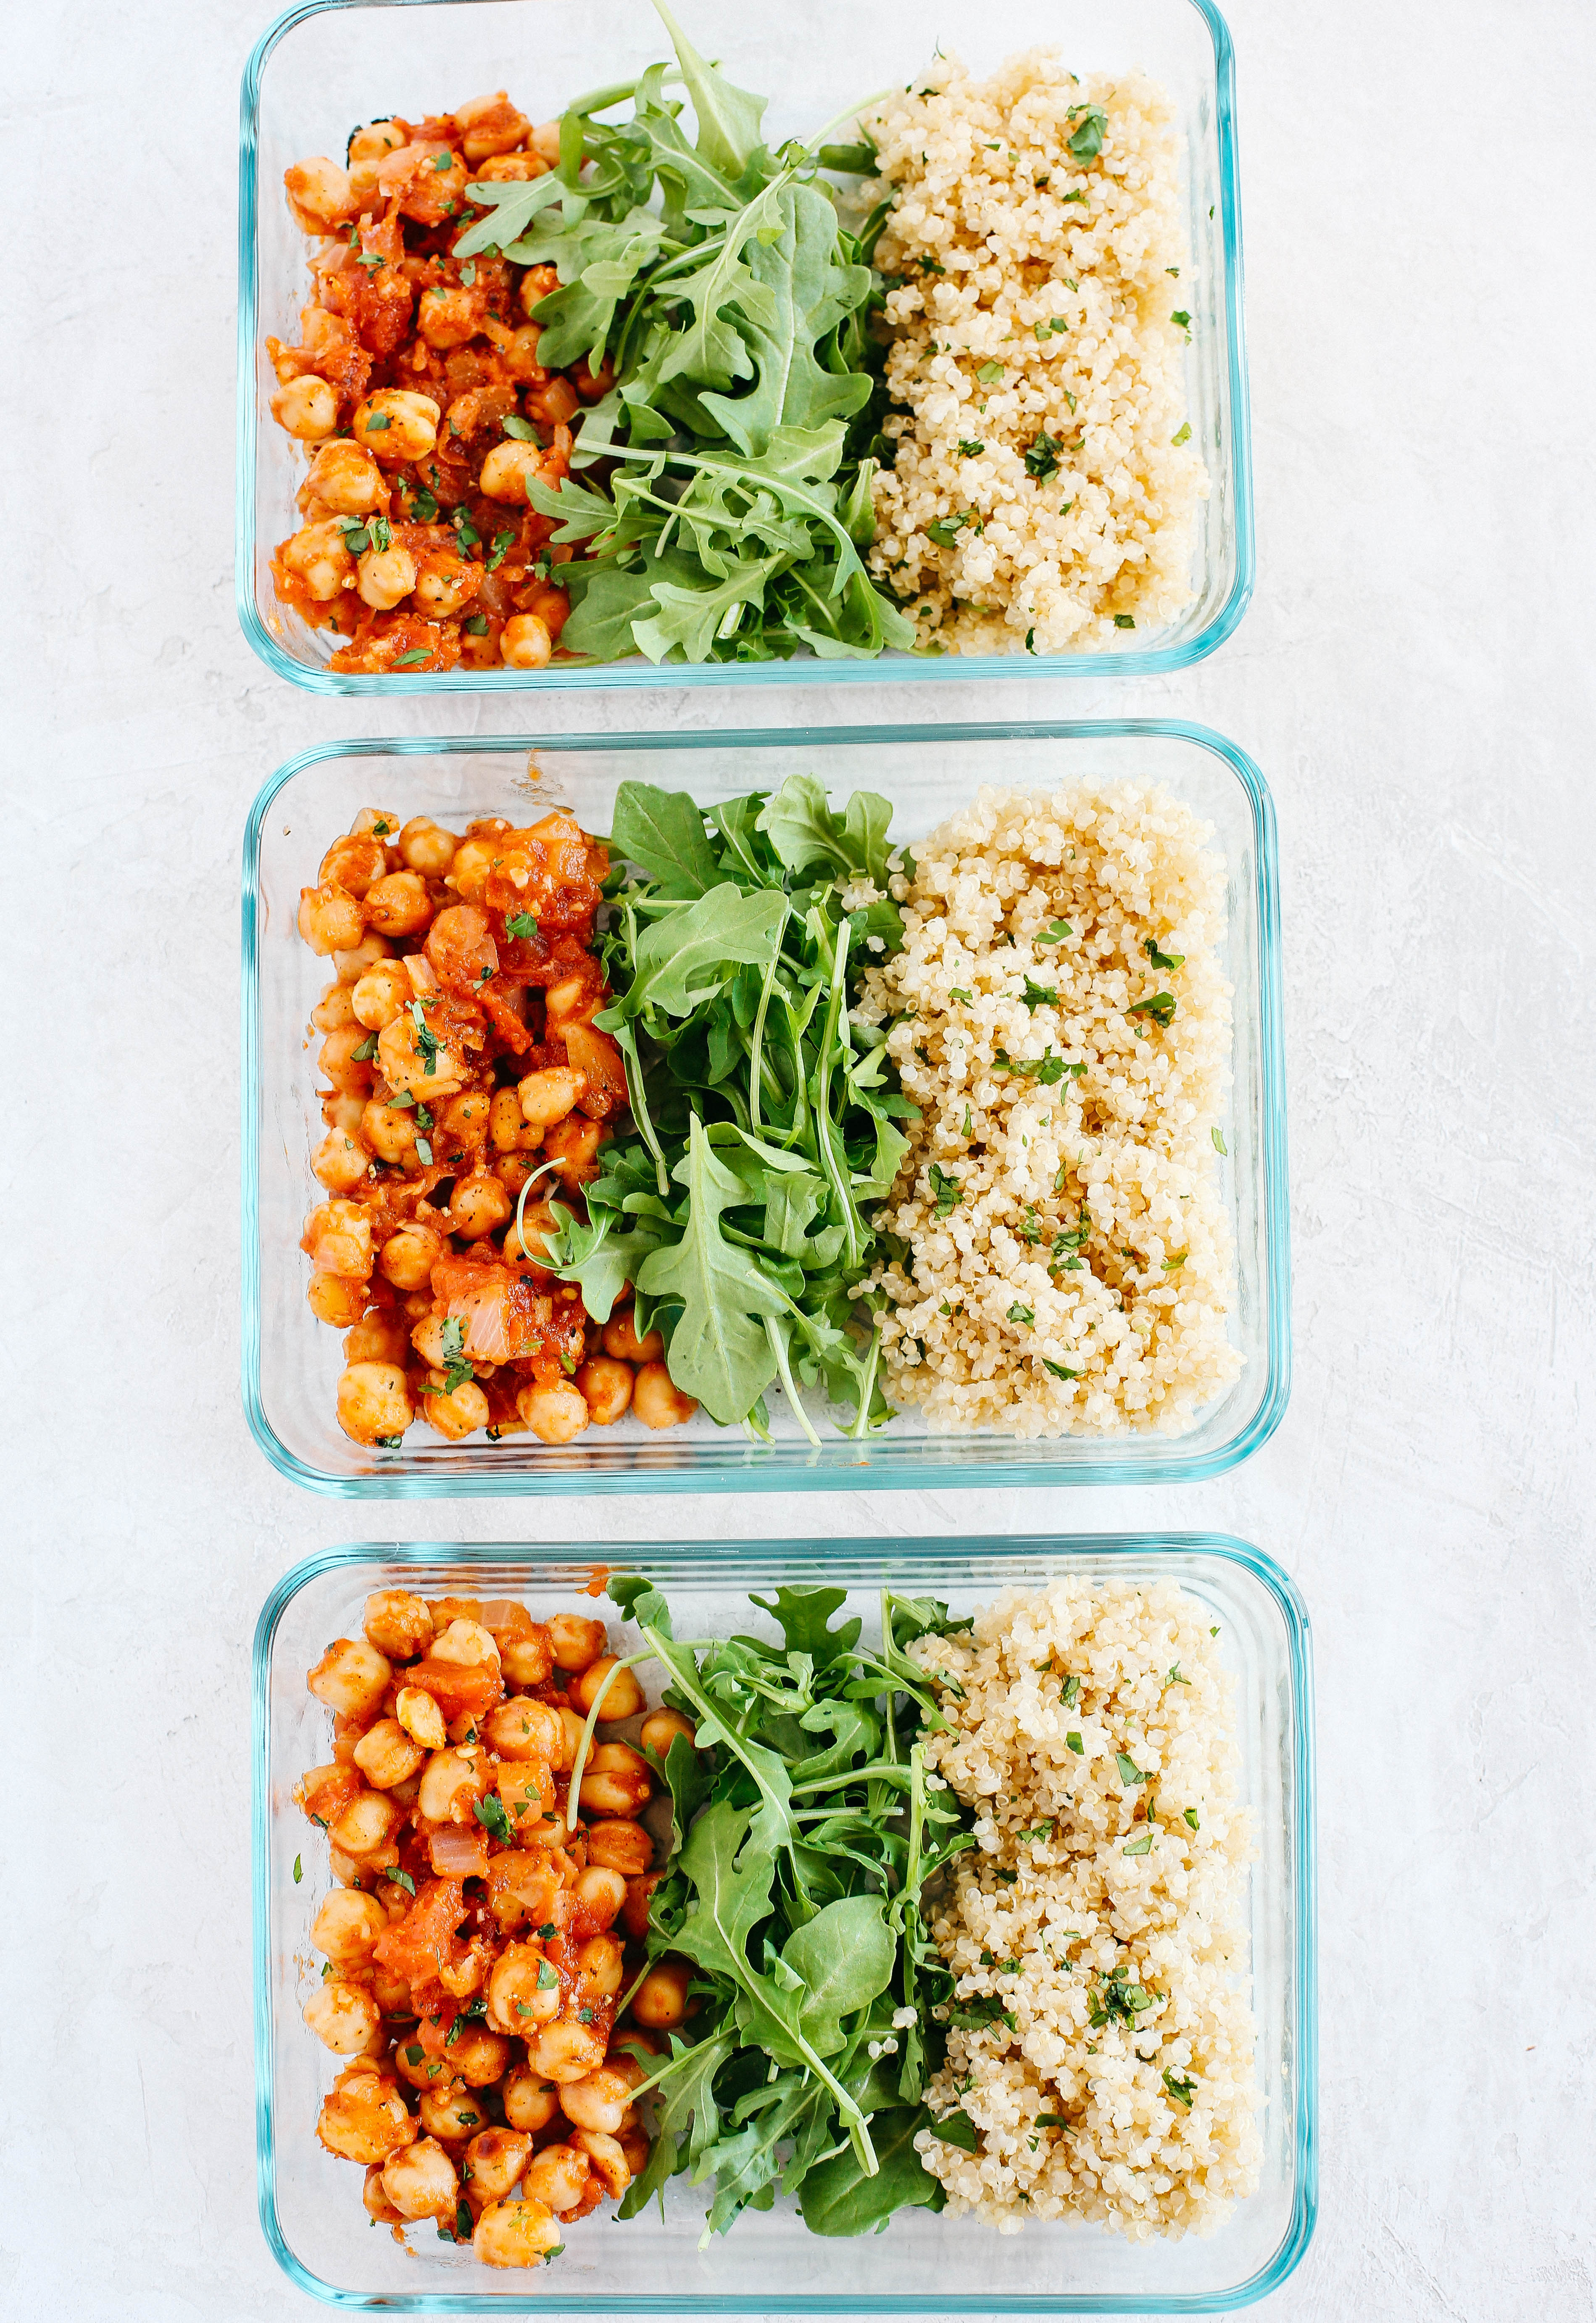 Clean Eating Meal Prep - Organize Yourself Skinny